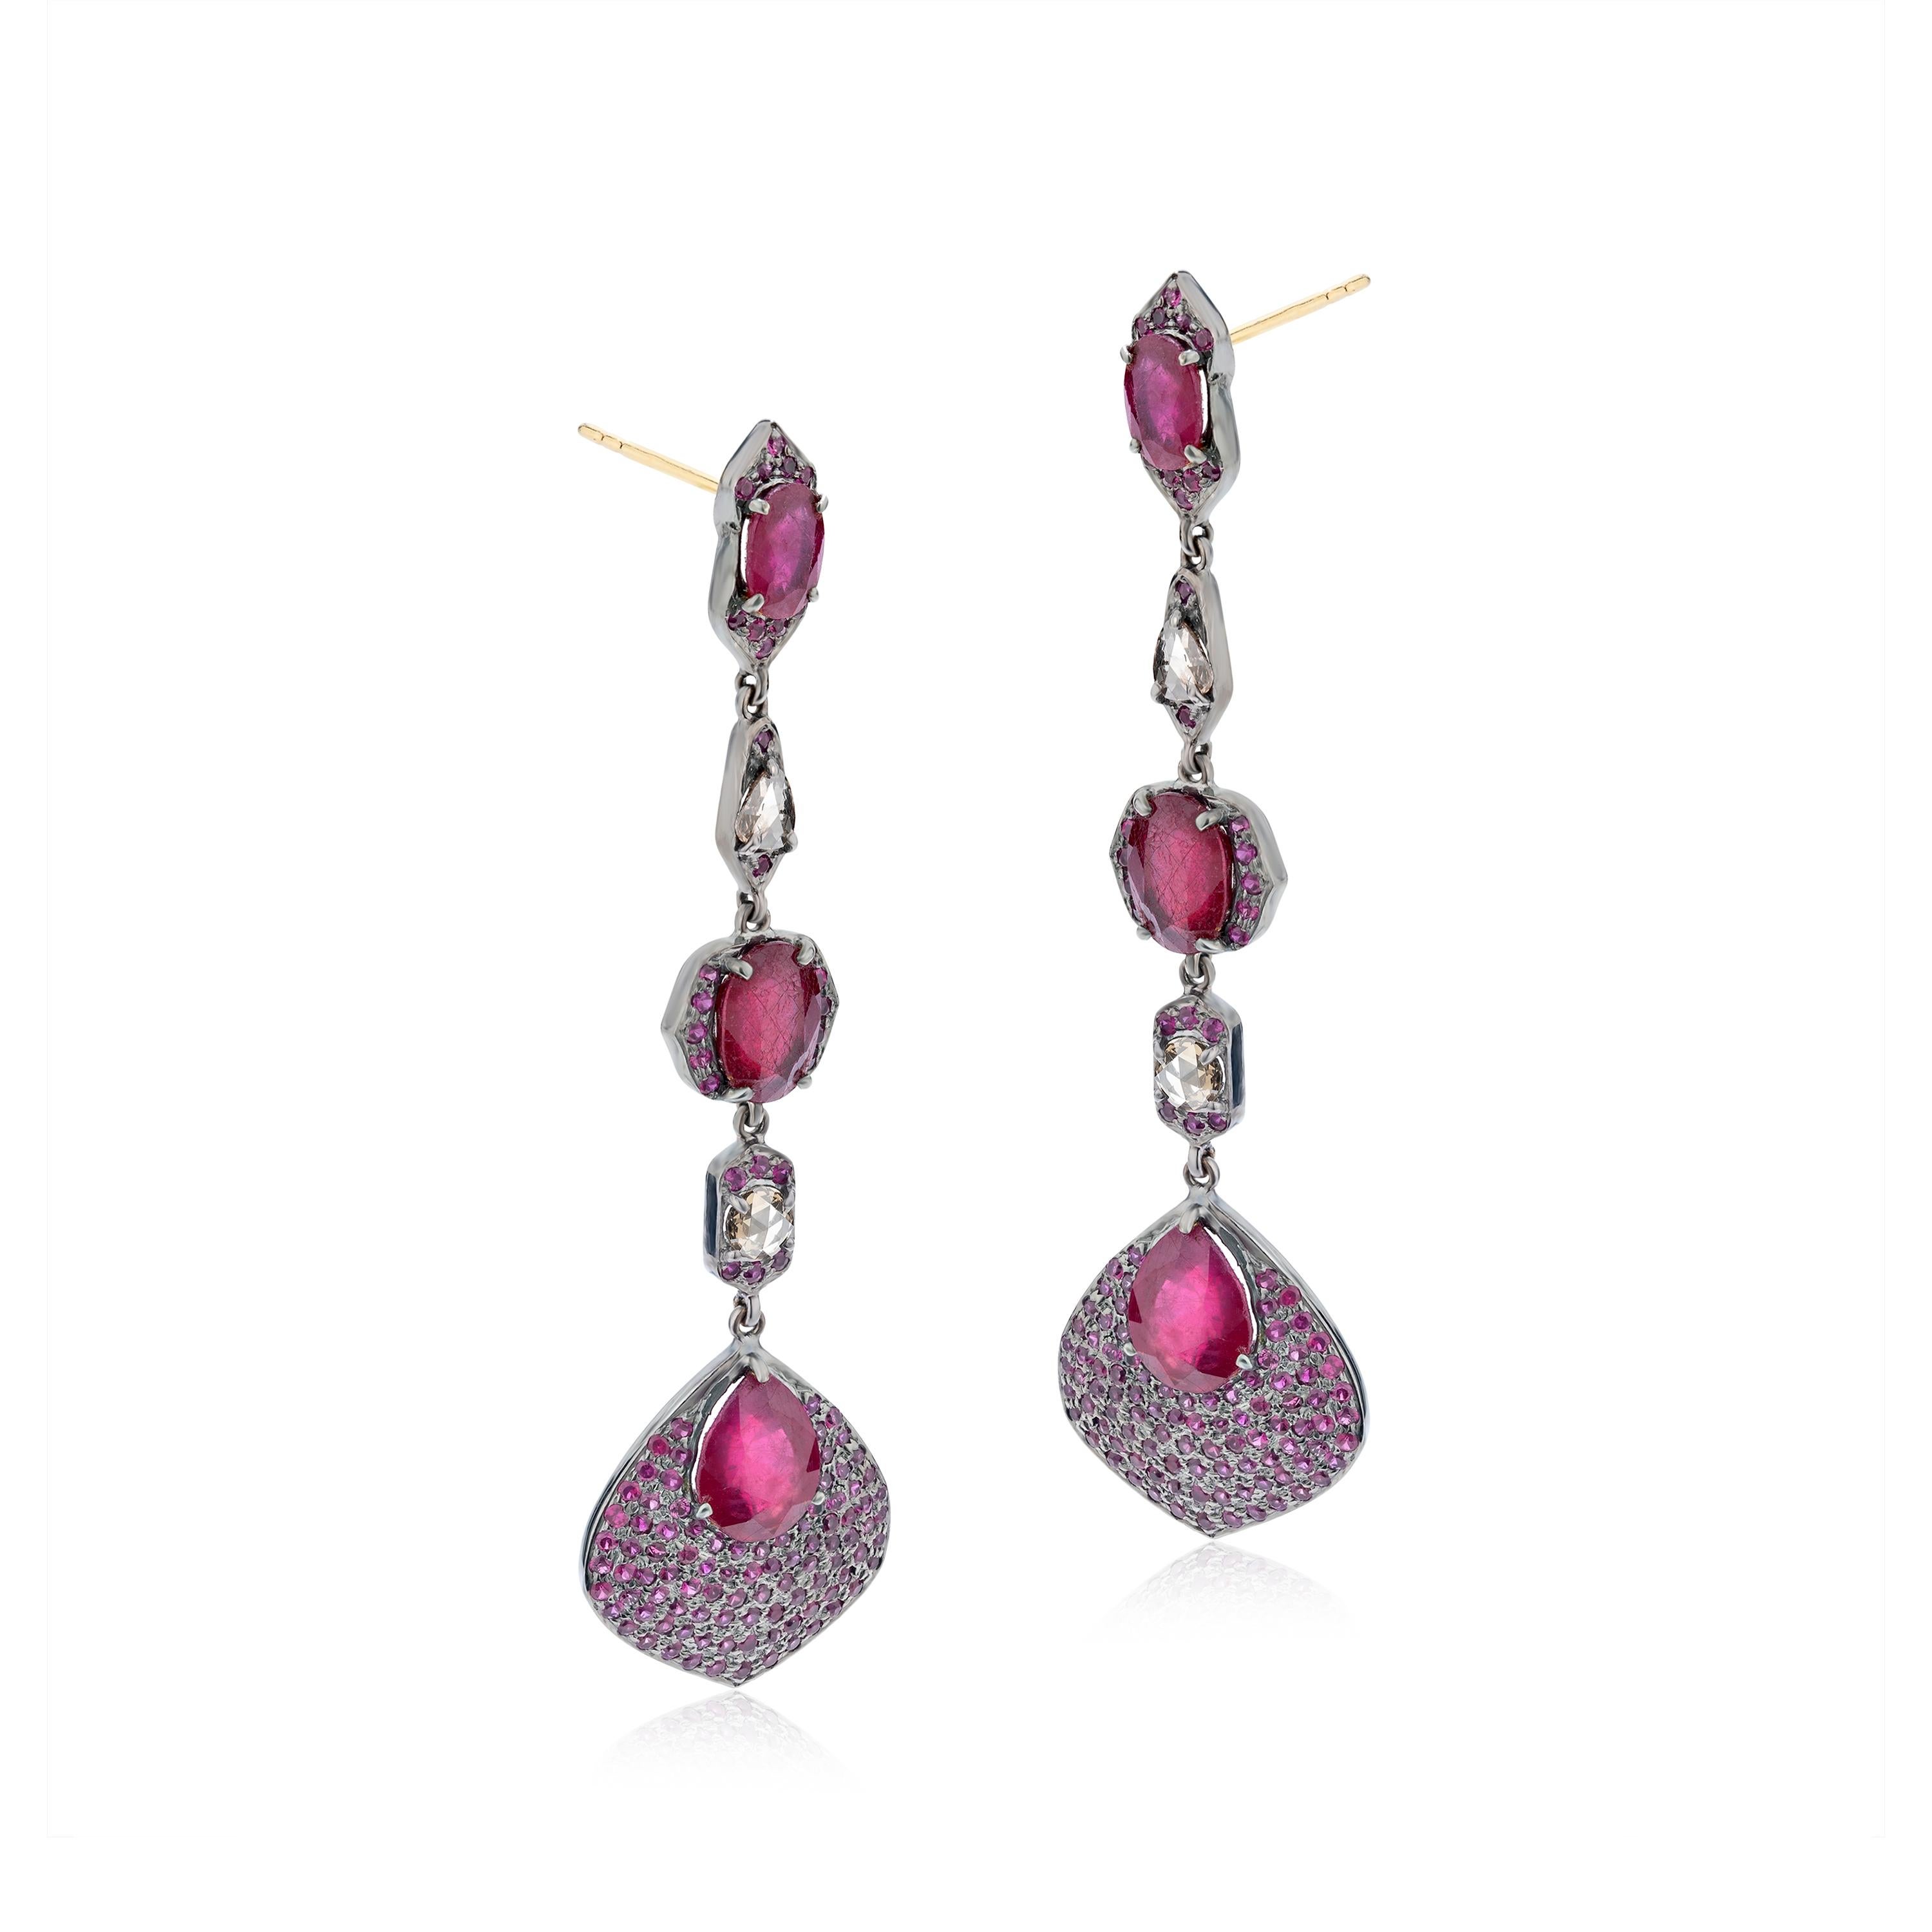 This Gemistry, Victorian 12.74 Ct. T.W Ruby and Diamond Drop Earrings features round and pear ruby and diamonds alternating on 18K/925 polished surface .  Round ruby studded leaf drops completes this mesmerizing piece. The classy earpieces are